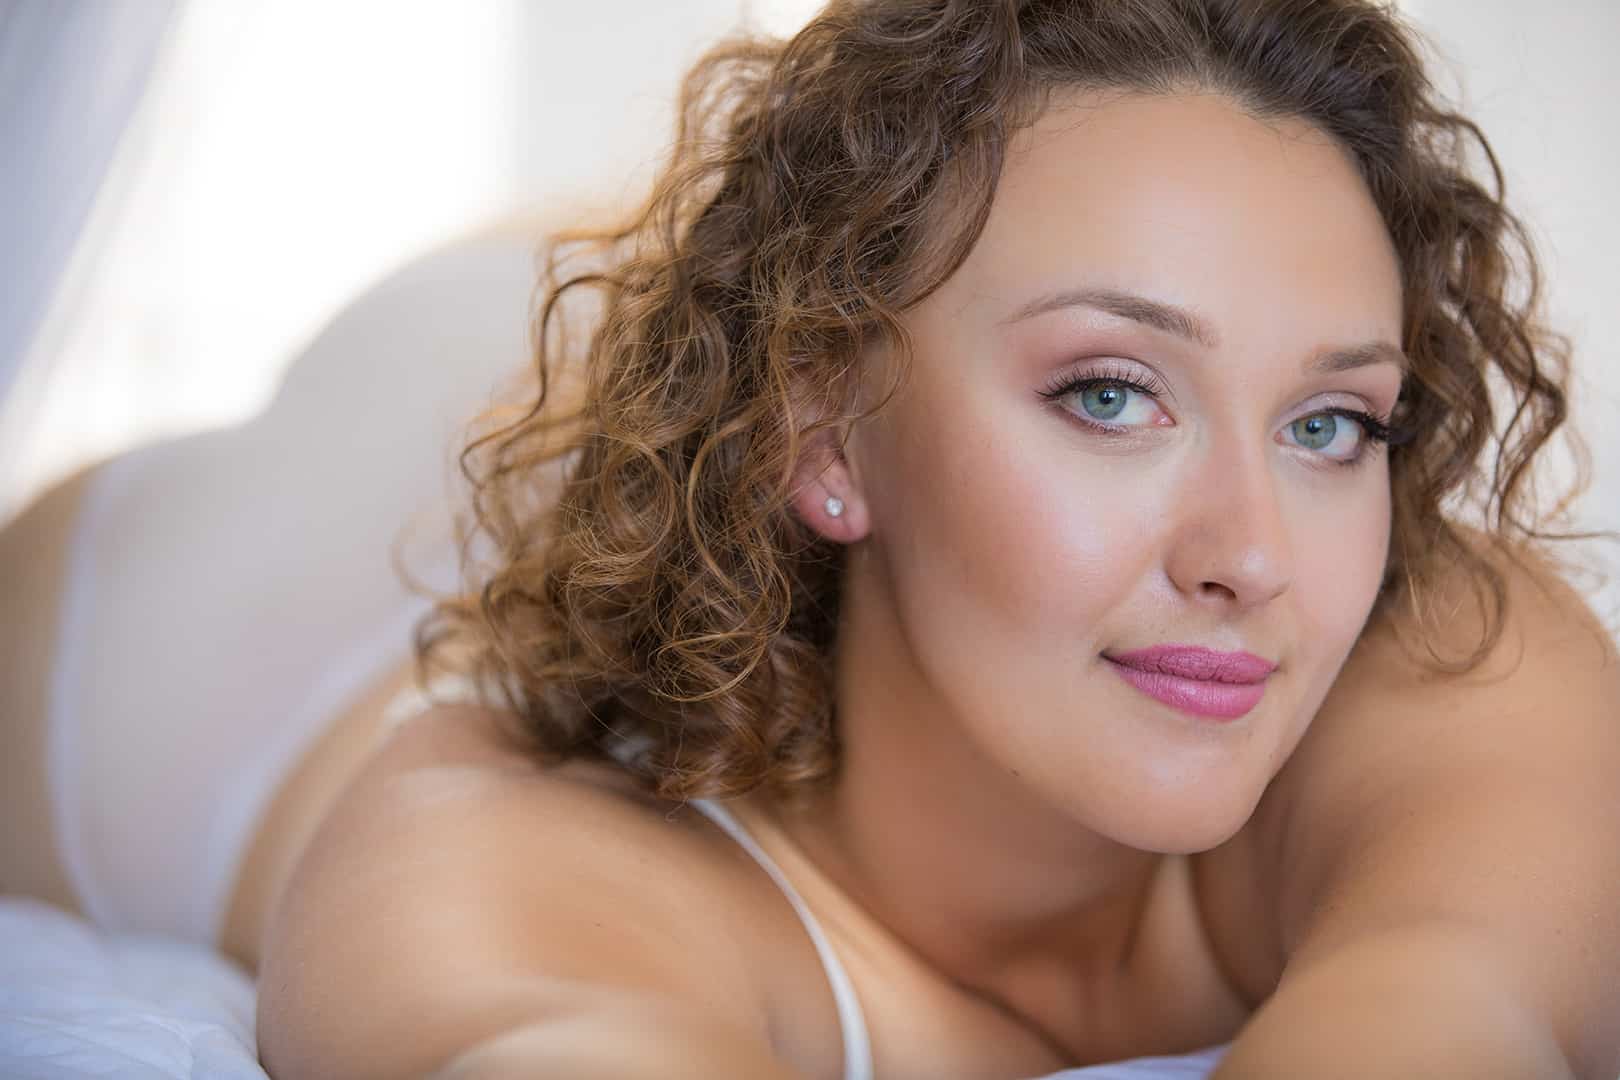 boudoir image of woman smiling confidently